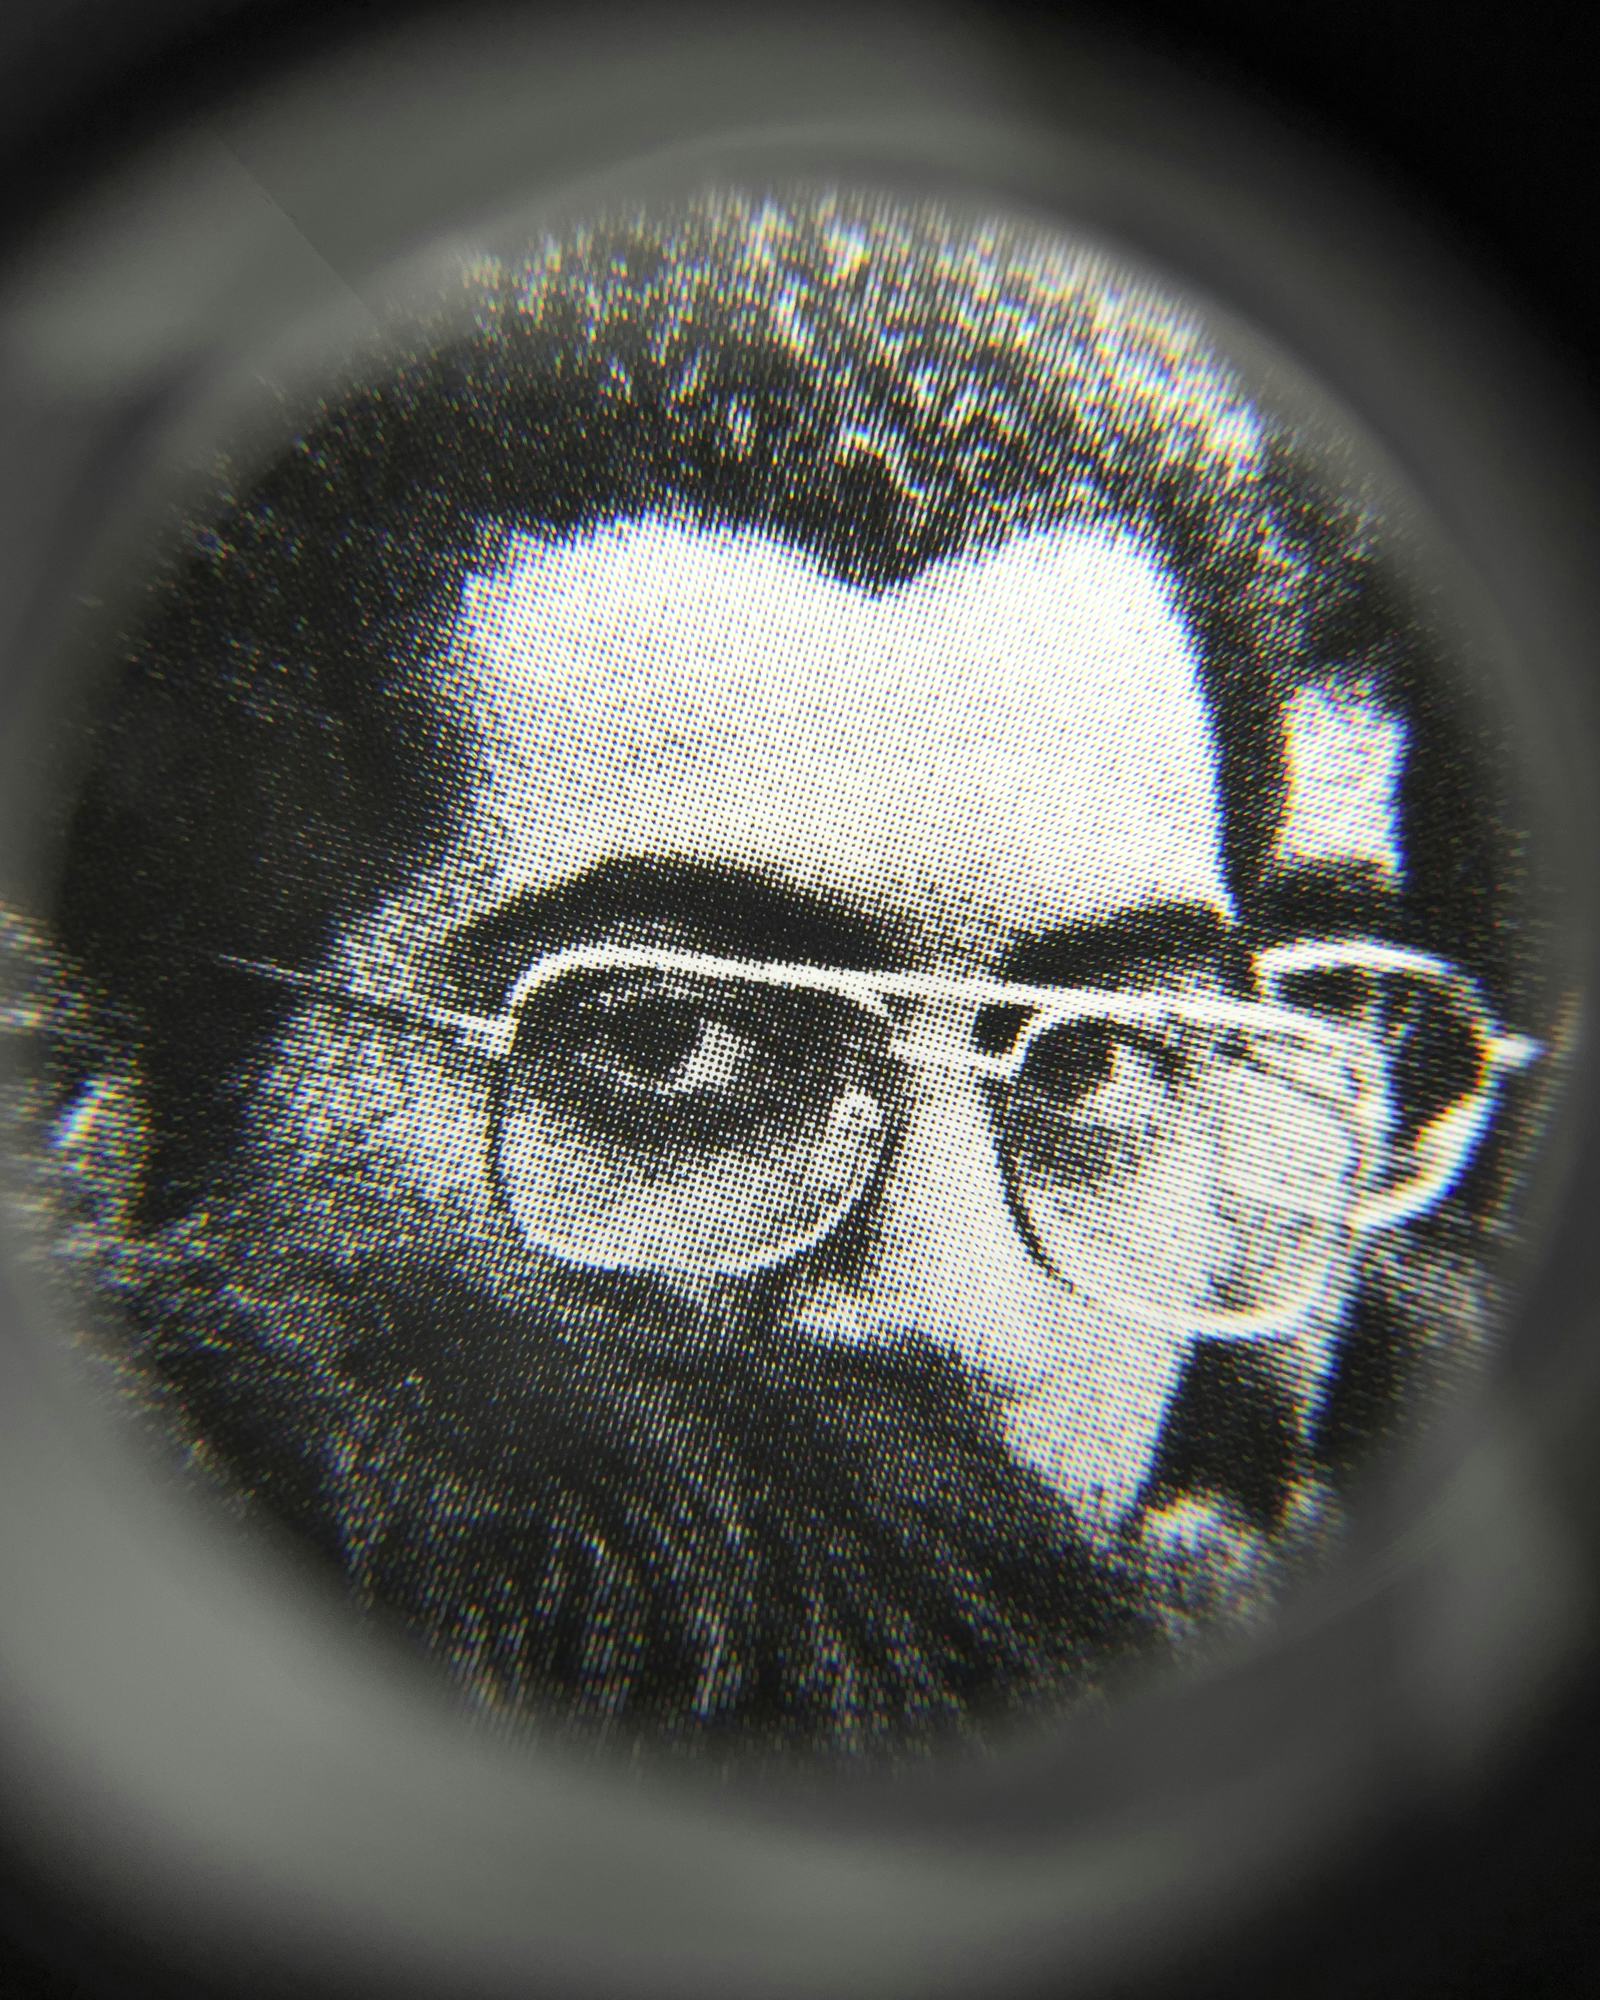 Black and white close-up image of an existing photograph, showing a man staring straight into the camera. Shot through a magnifying lens © Amin Yousefi